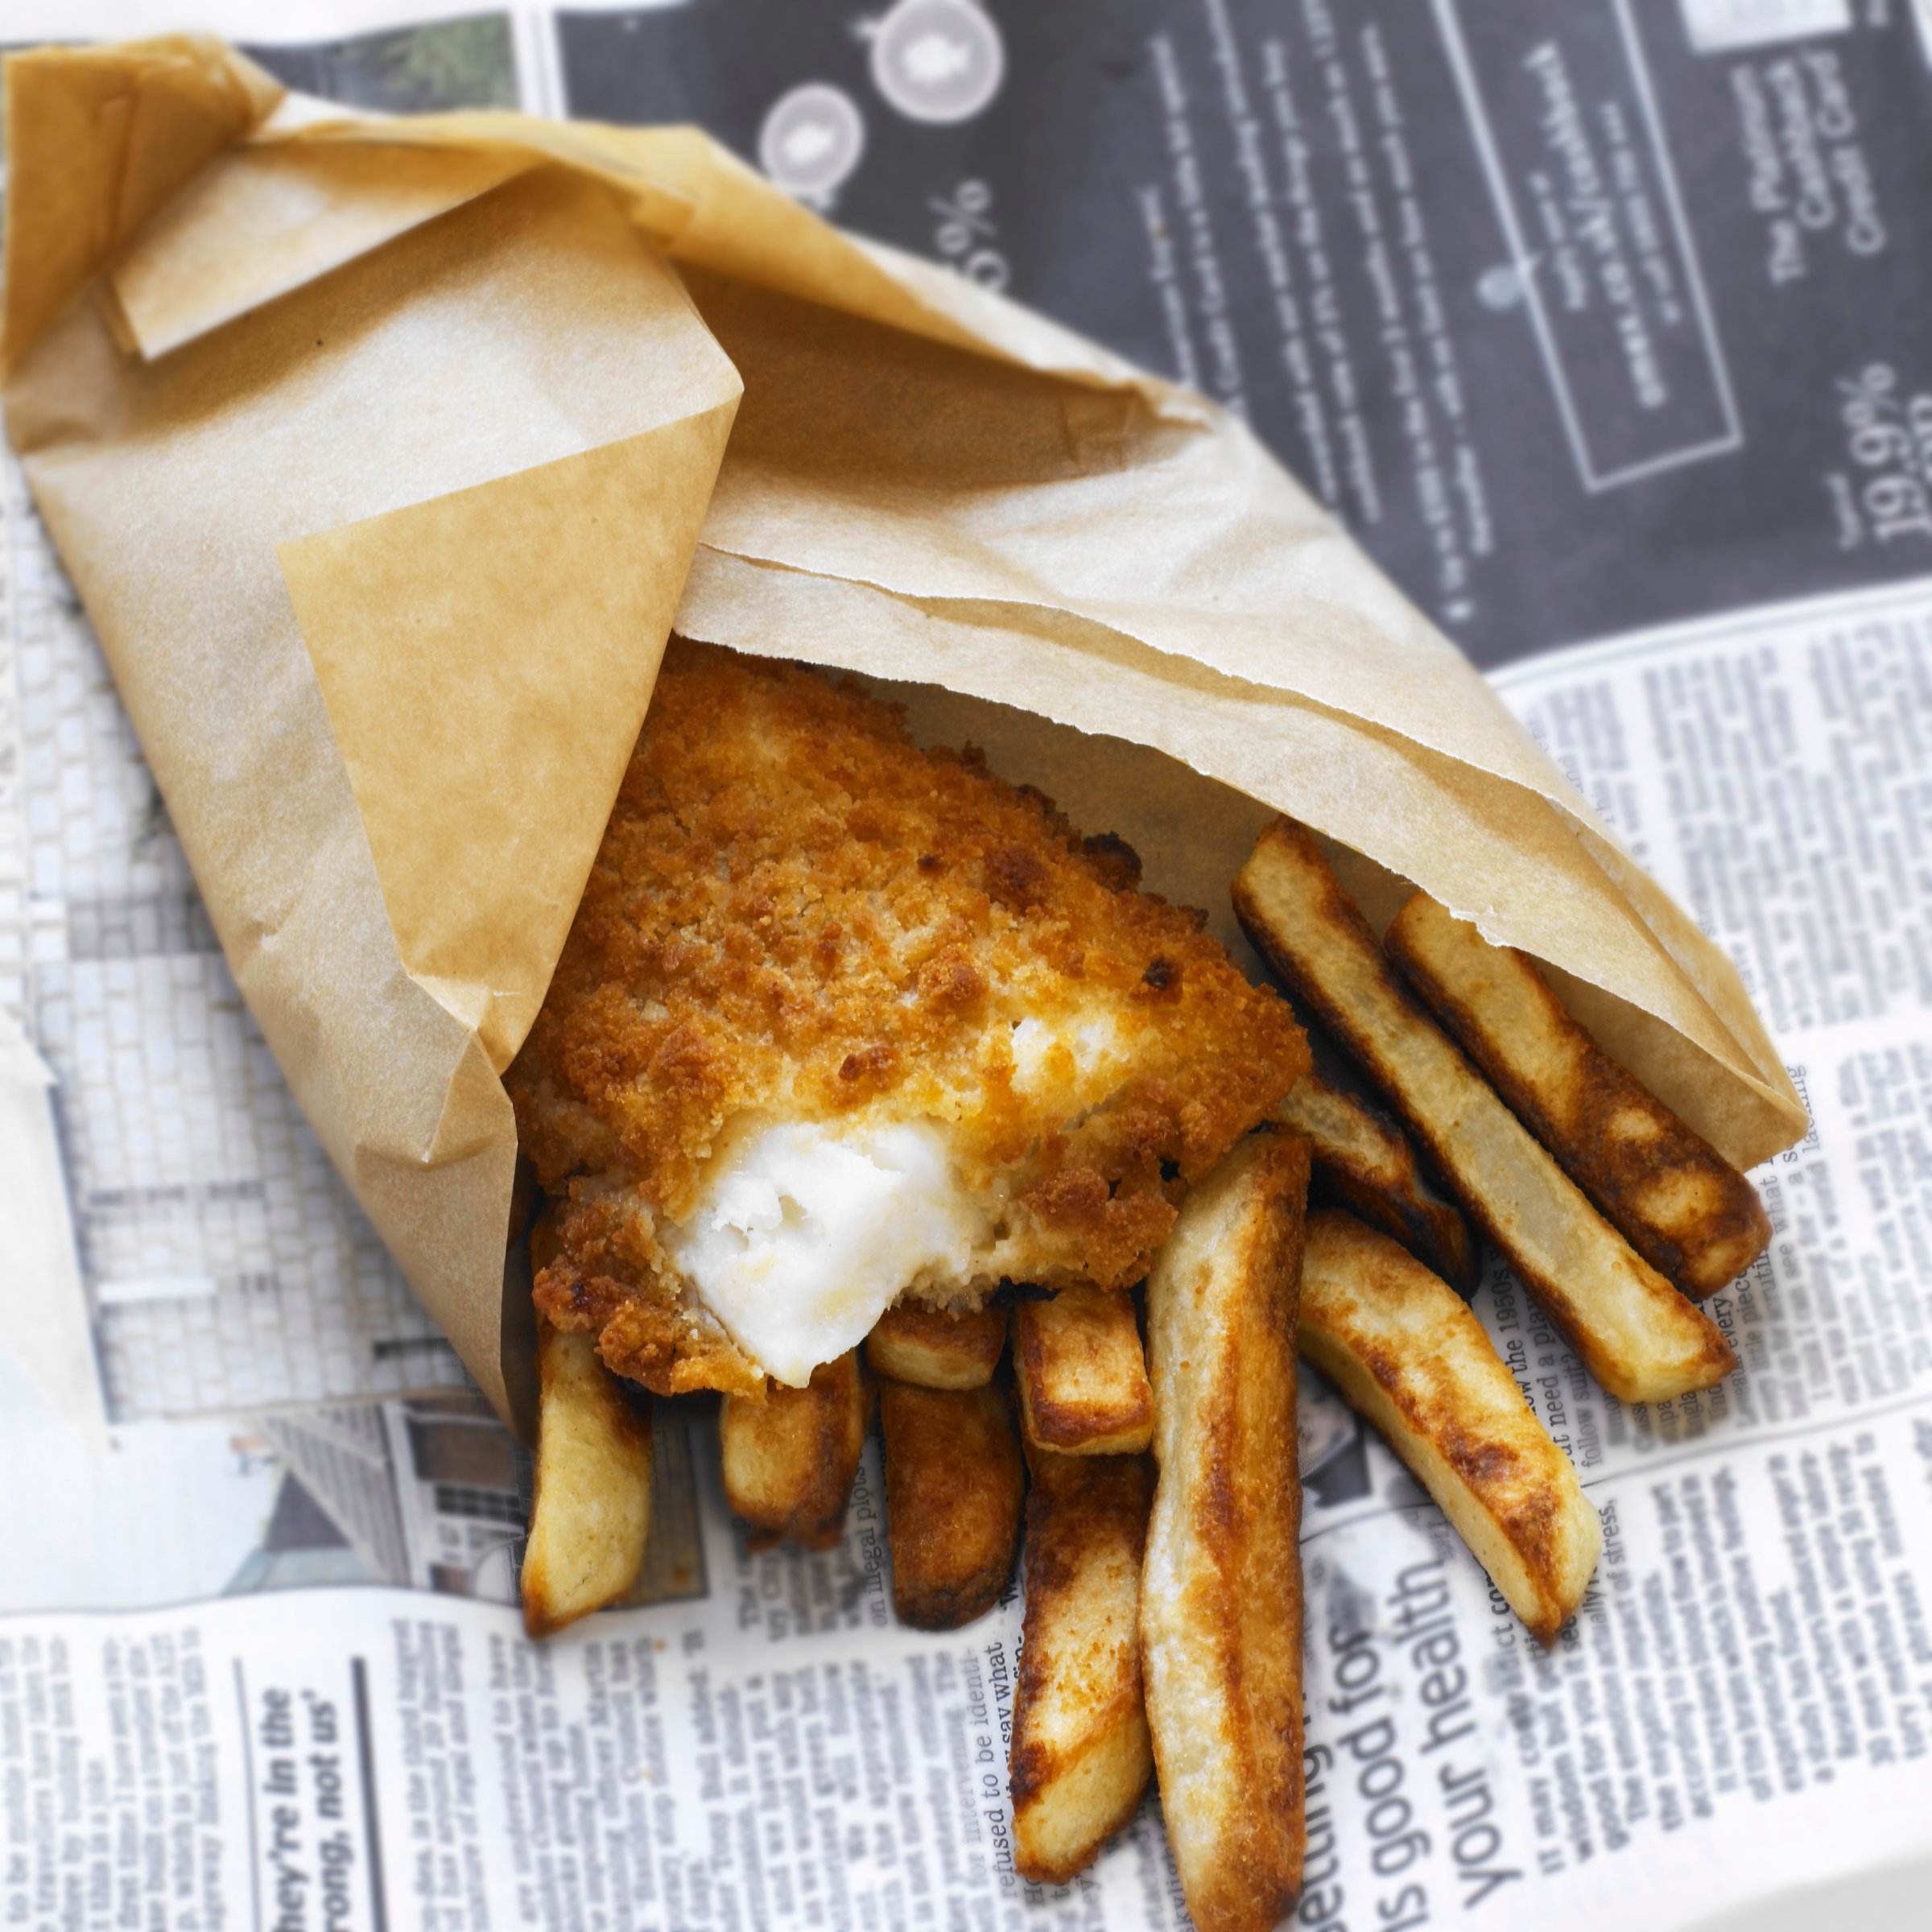 The discovery of increased numbers of squid in the North Sea could affect the British fish and chip industry.